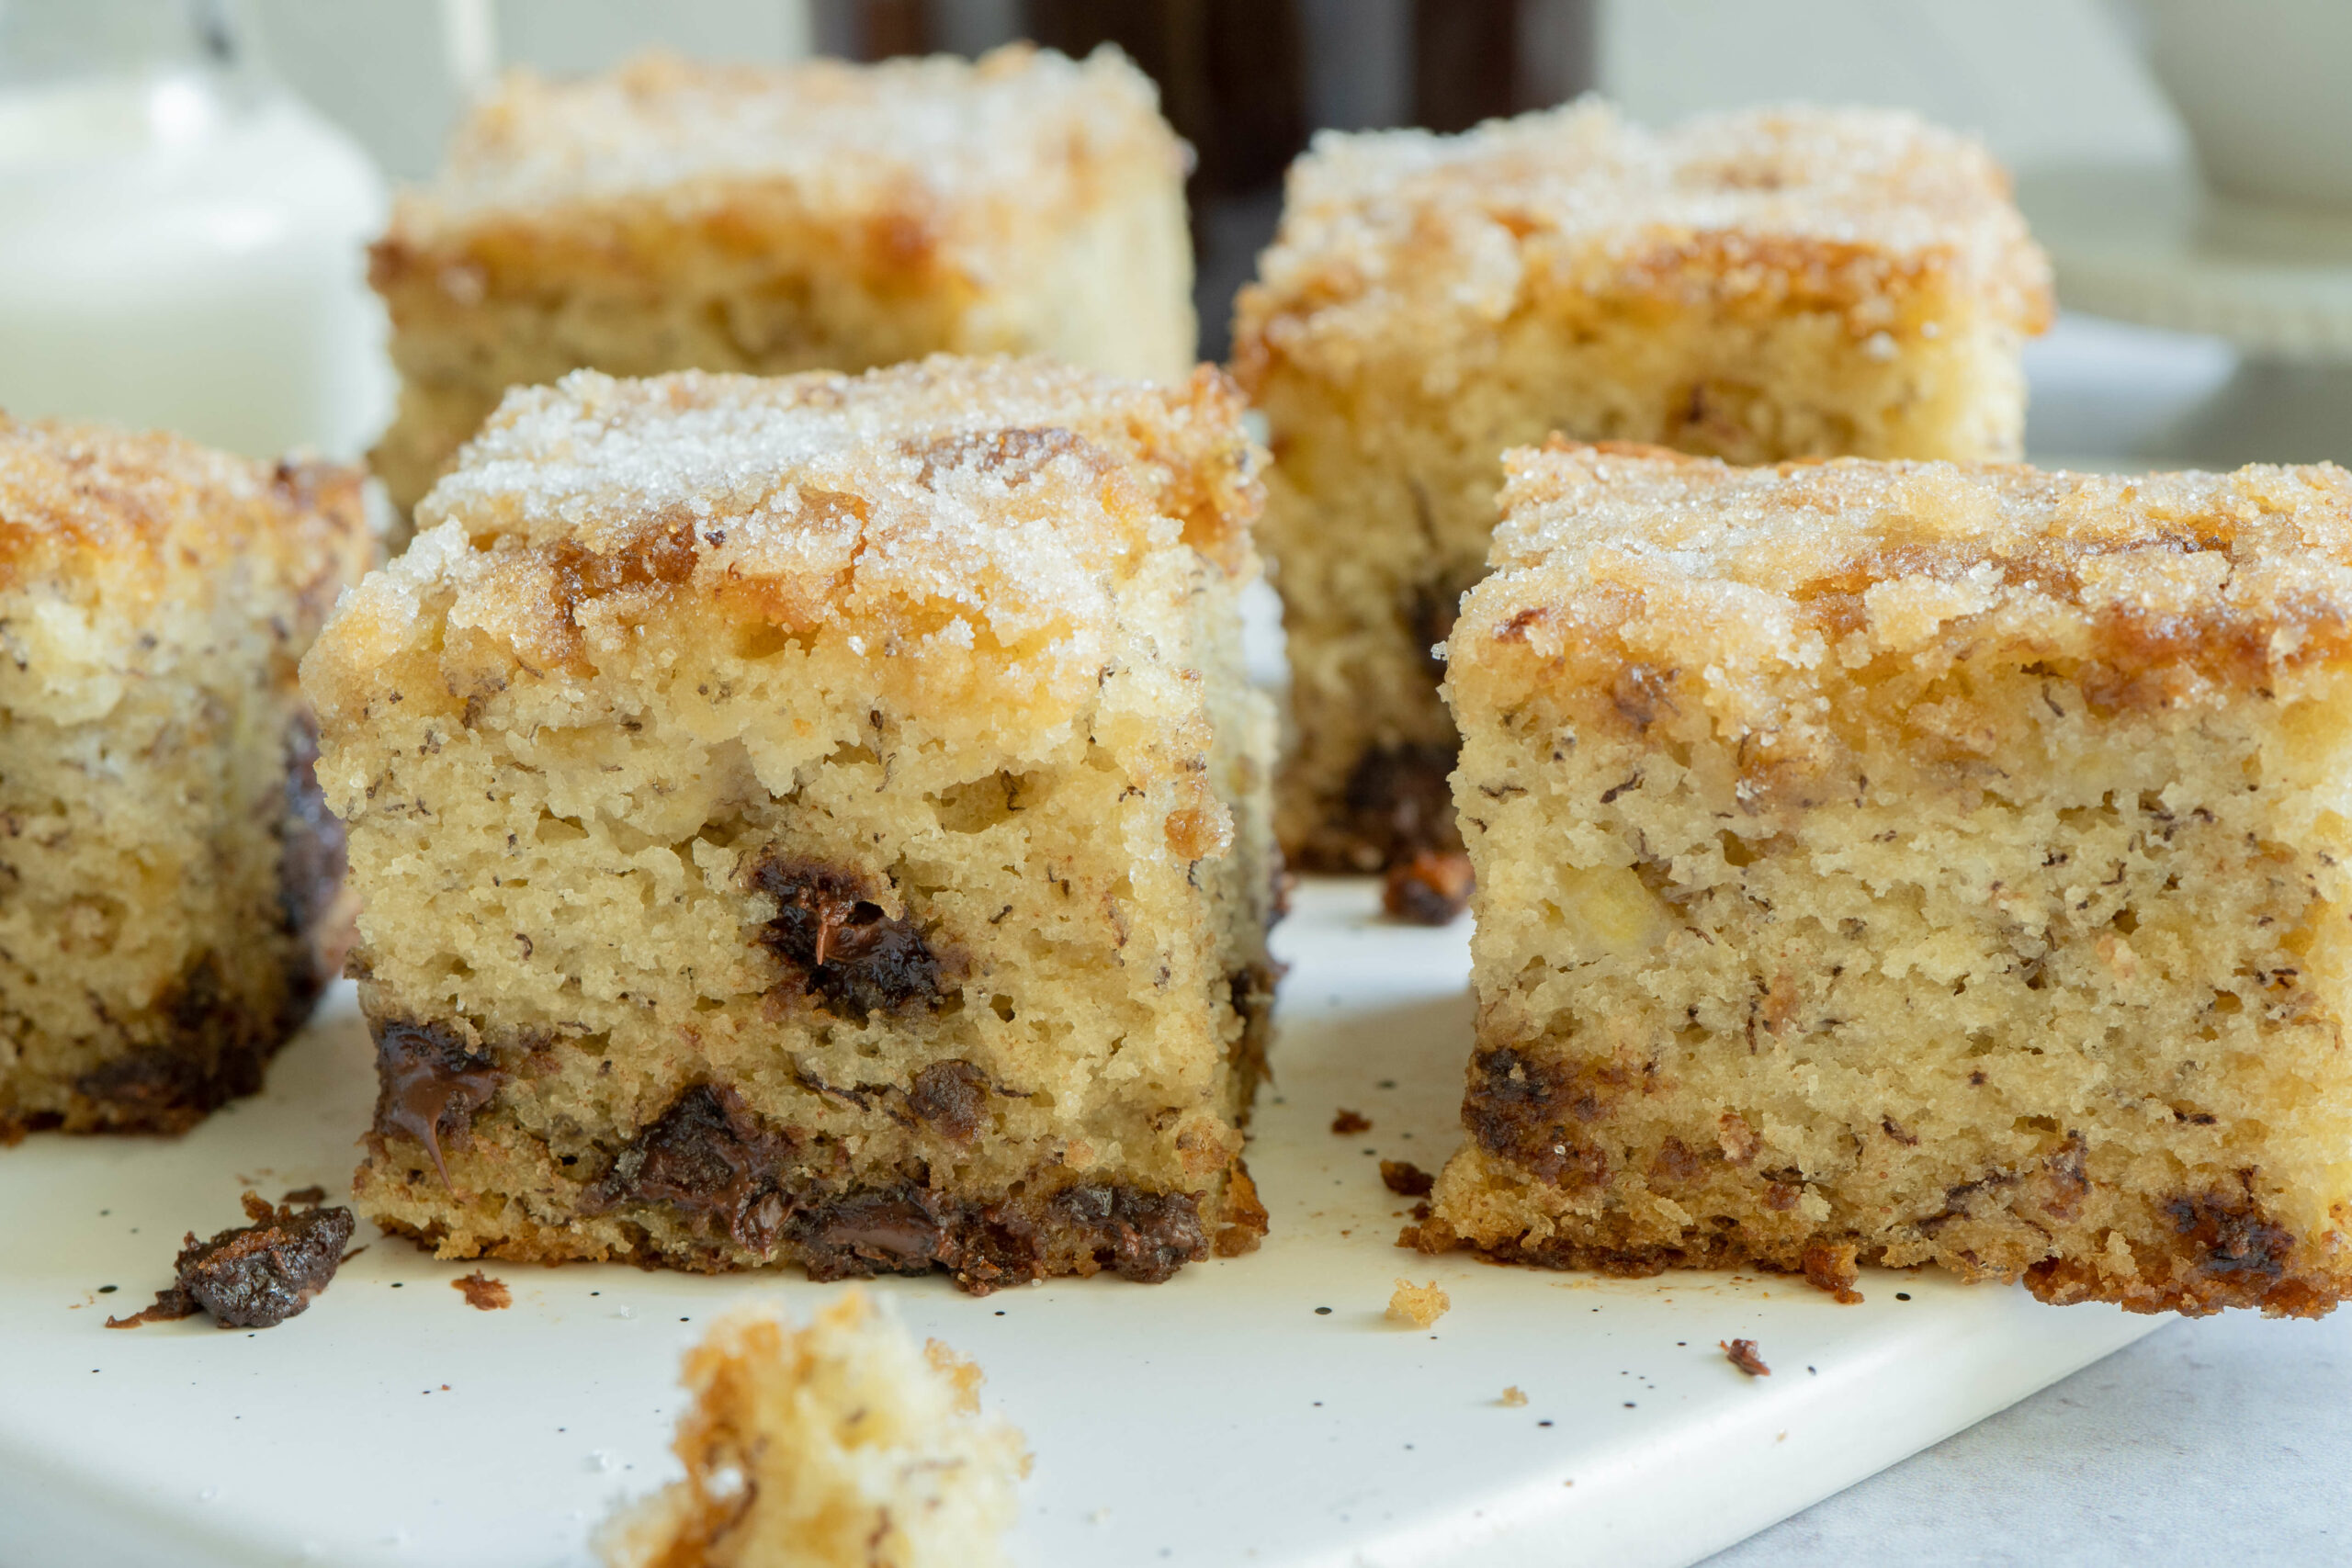 Closeup of the chocolate chip banana bread squares